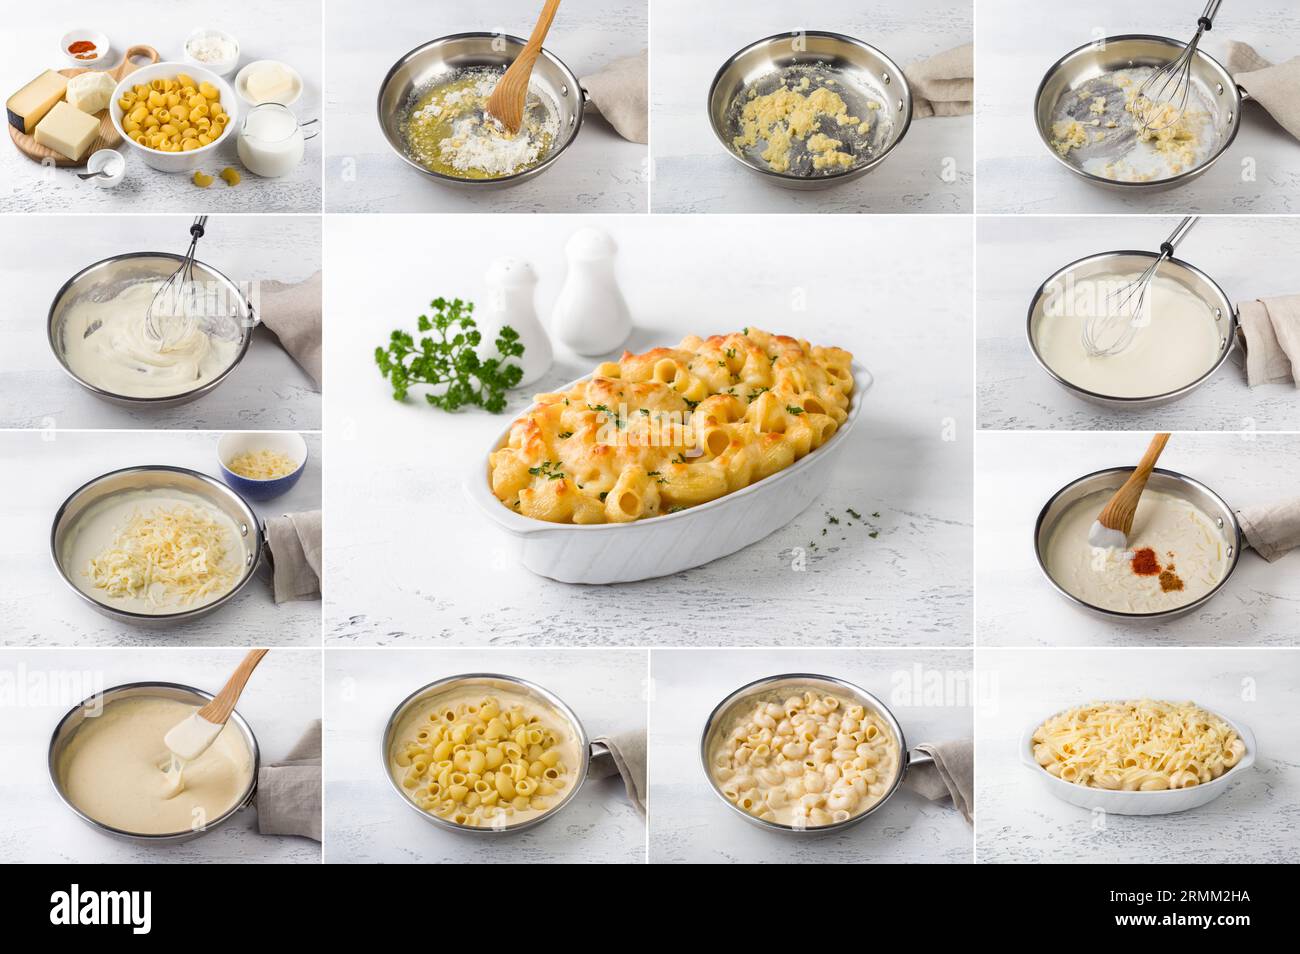 Cooking Mac and cheese, American pasta in cheese sauce, collage, step by step, do it yourself, ingredients, cooking steps, final dish on a light gray Stock Photo